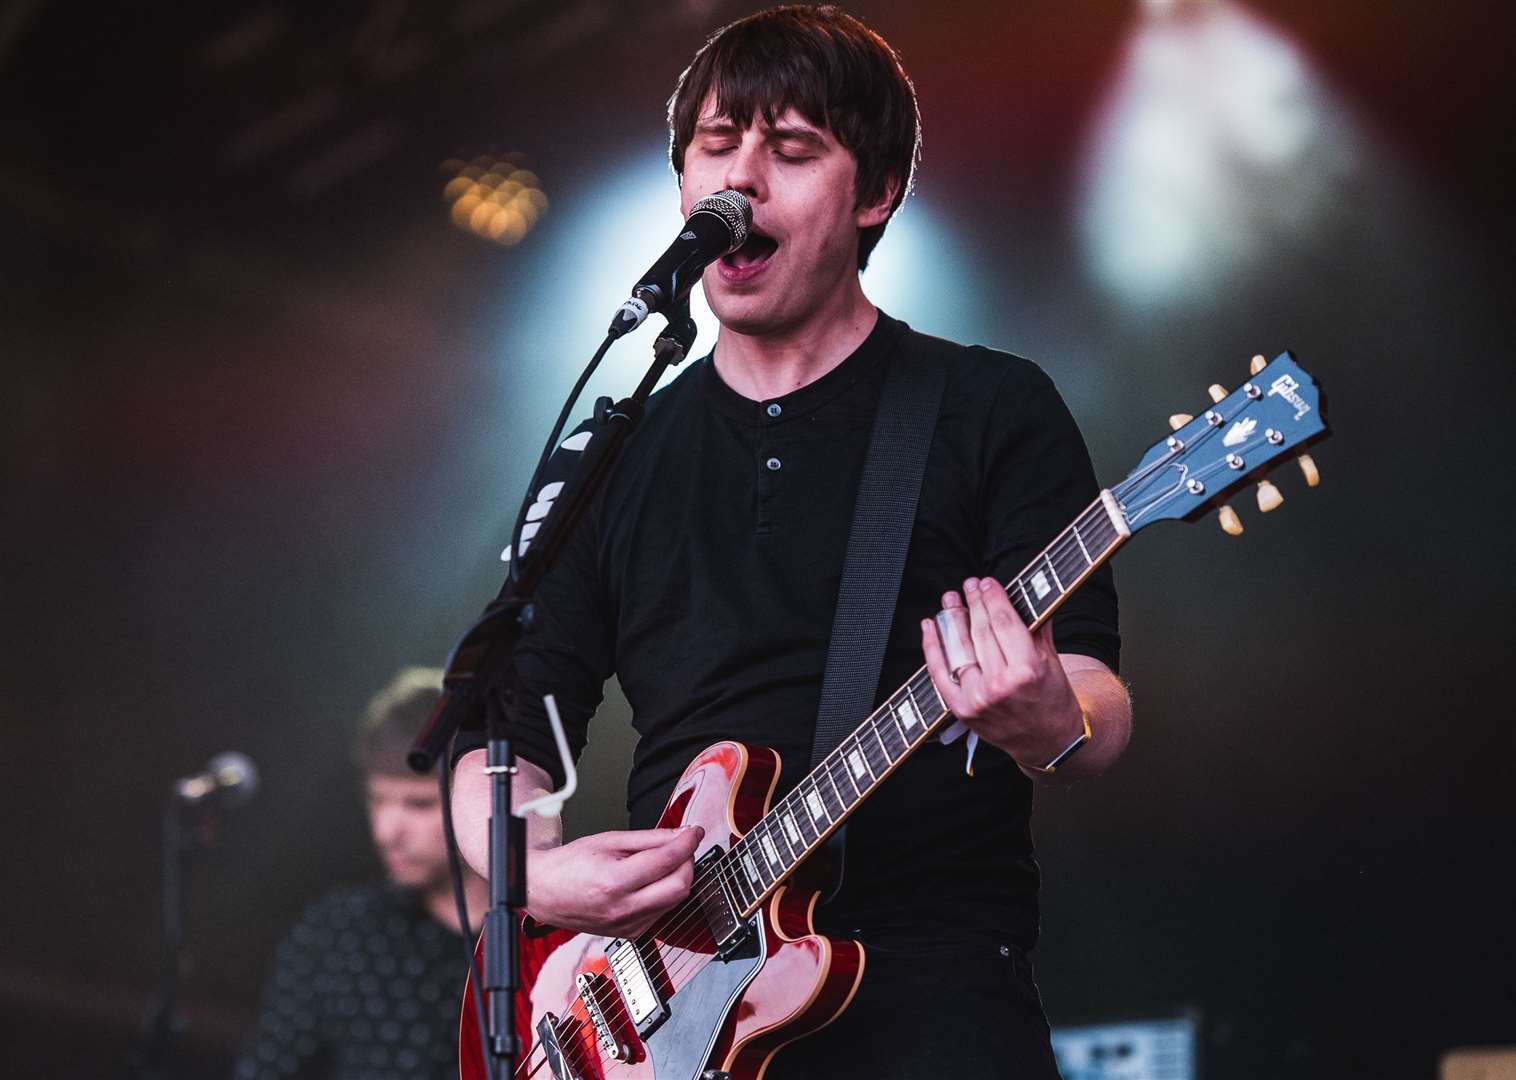 Jake Bugg performed on Friday at the festival